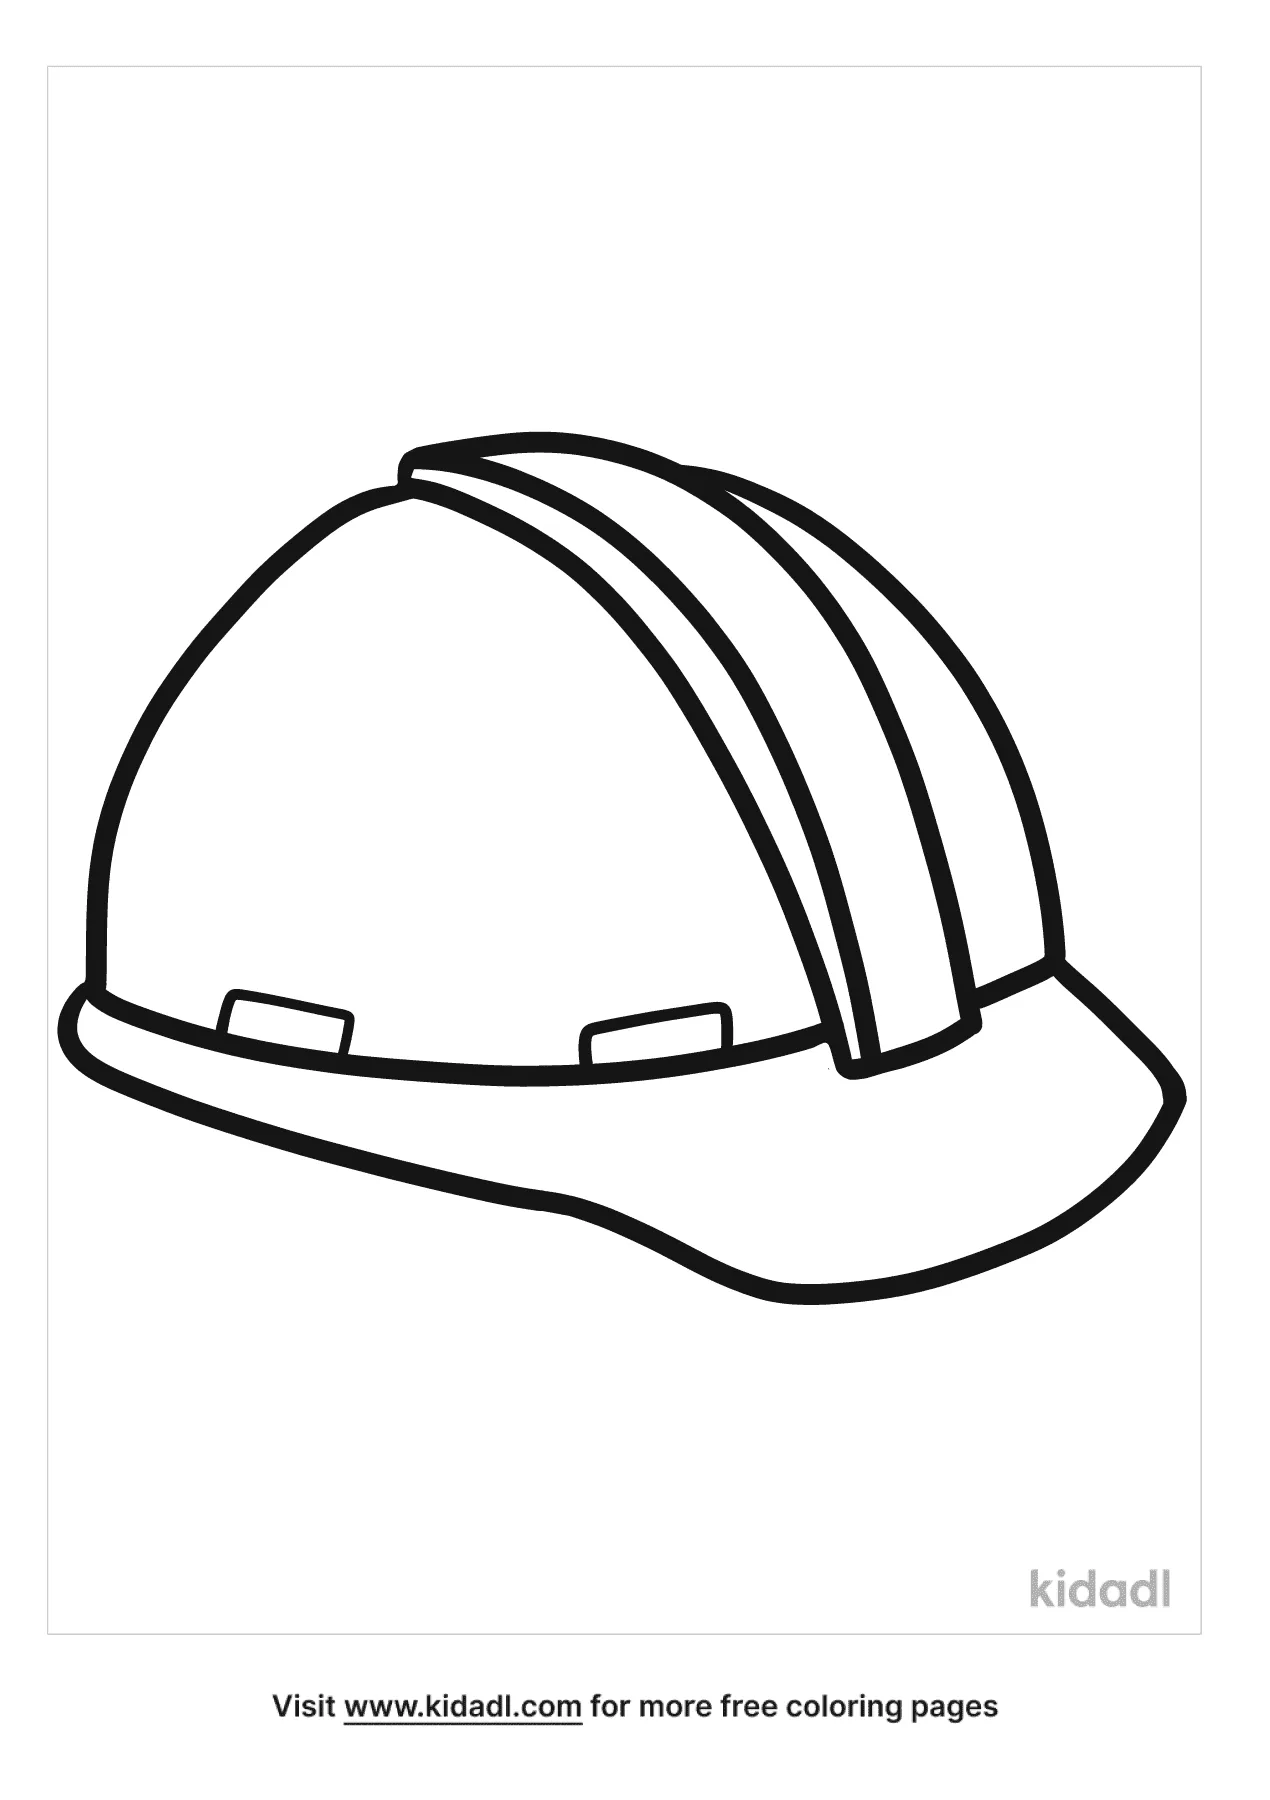 Hard Hat Coloring Pages Free Outdoor Coloring Pages Kidadl